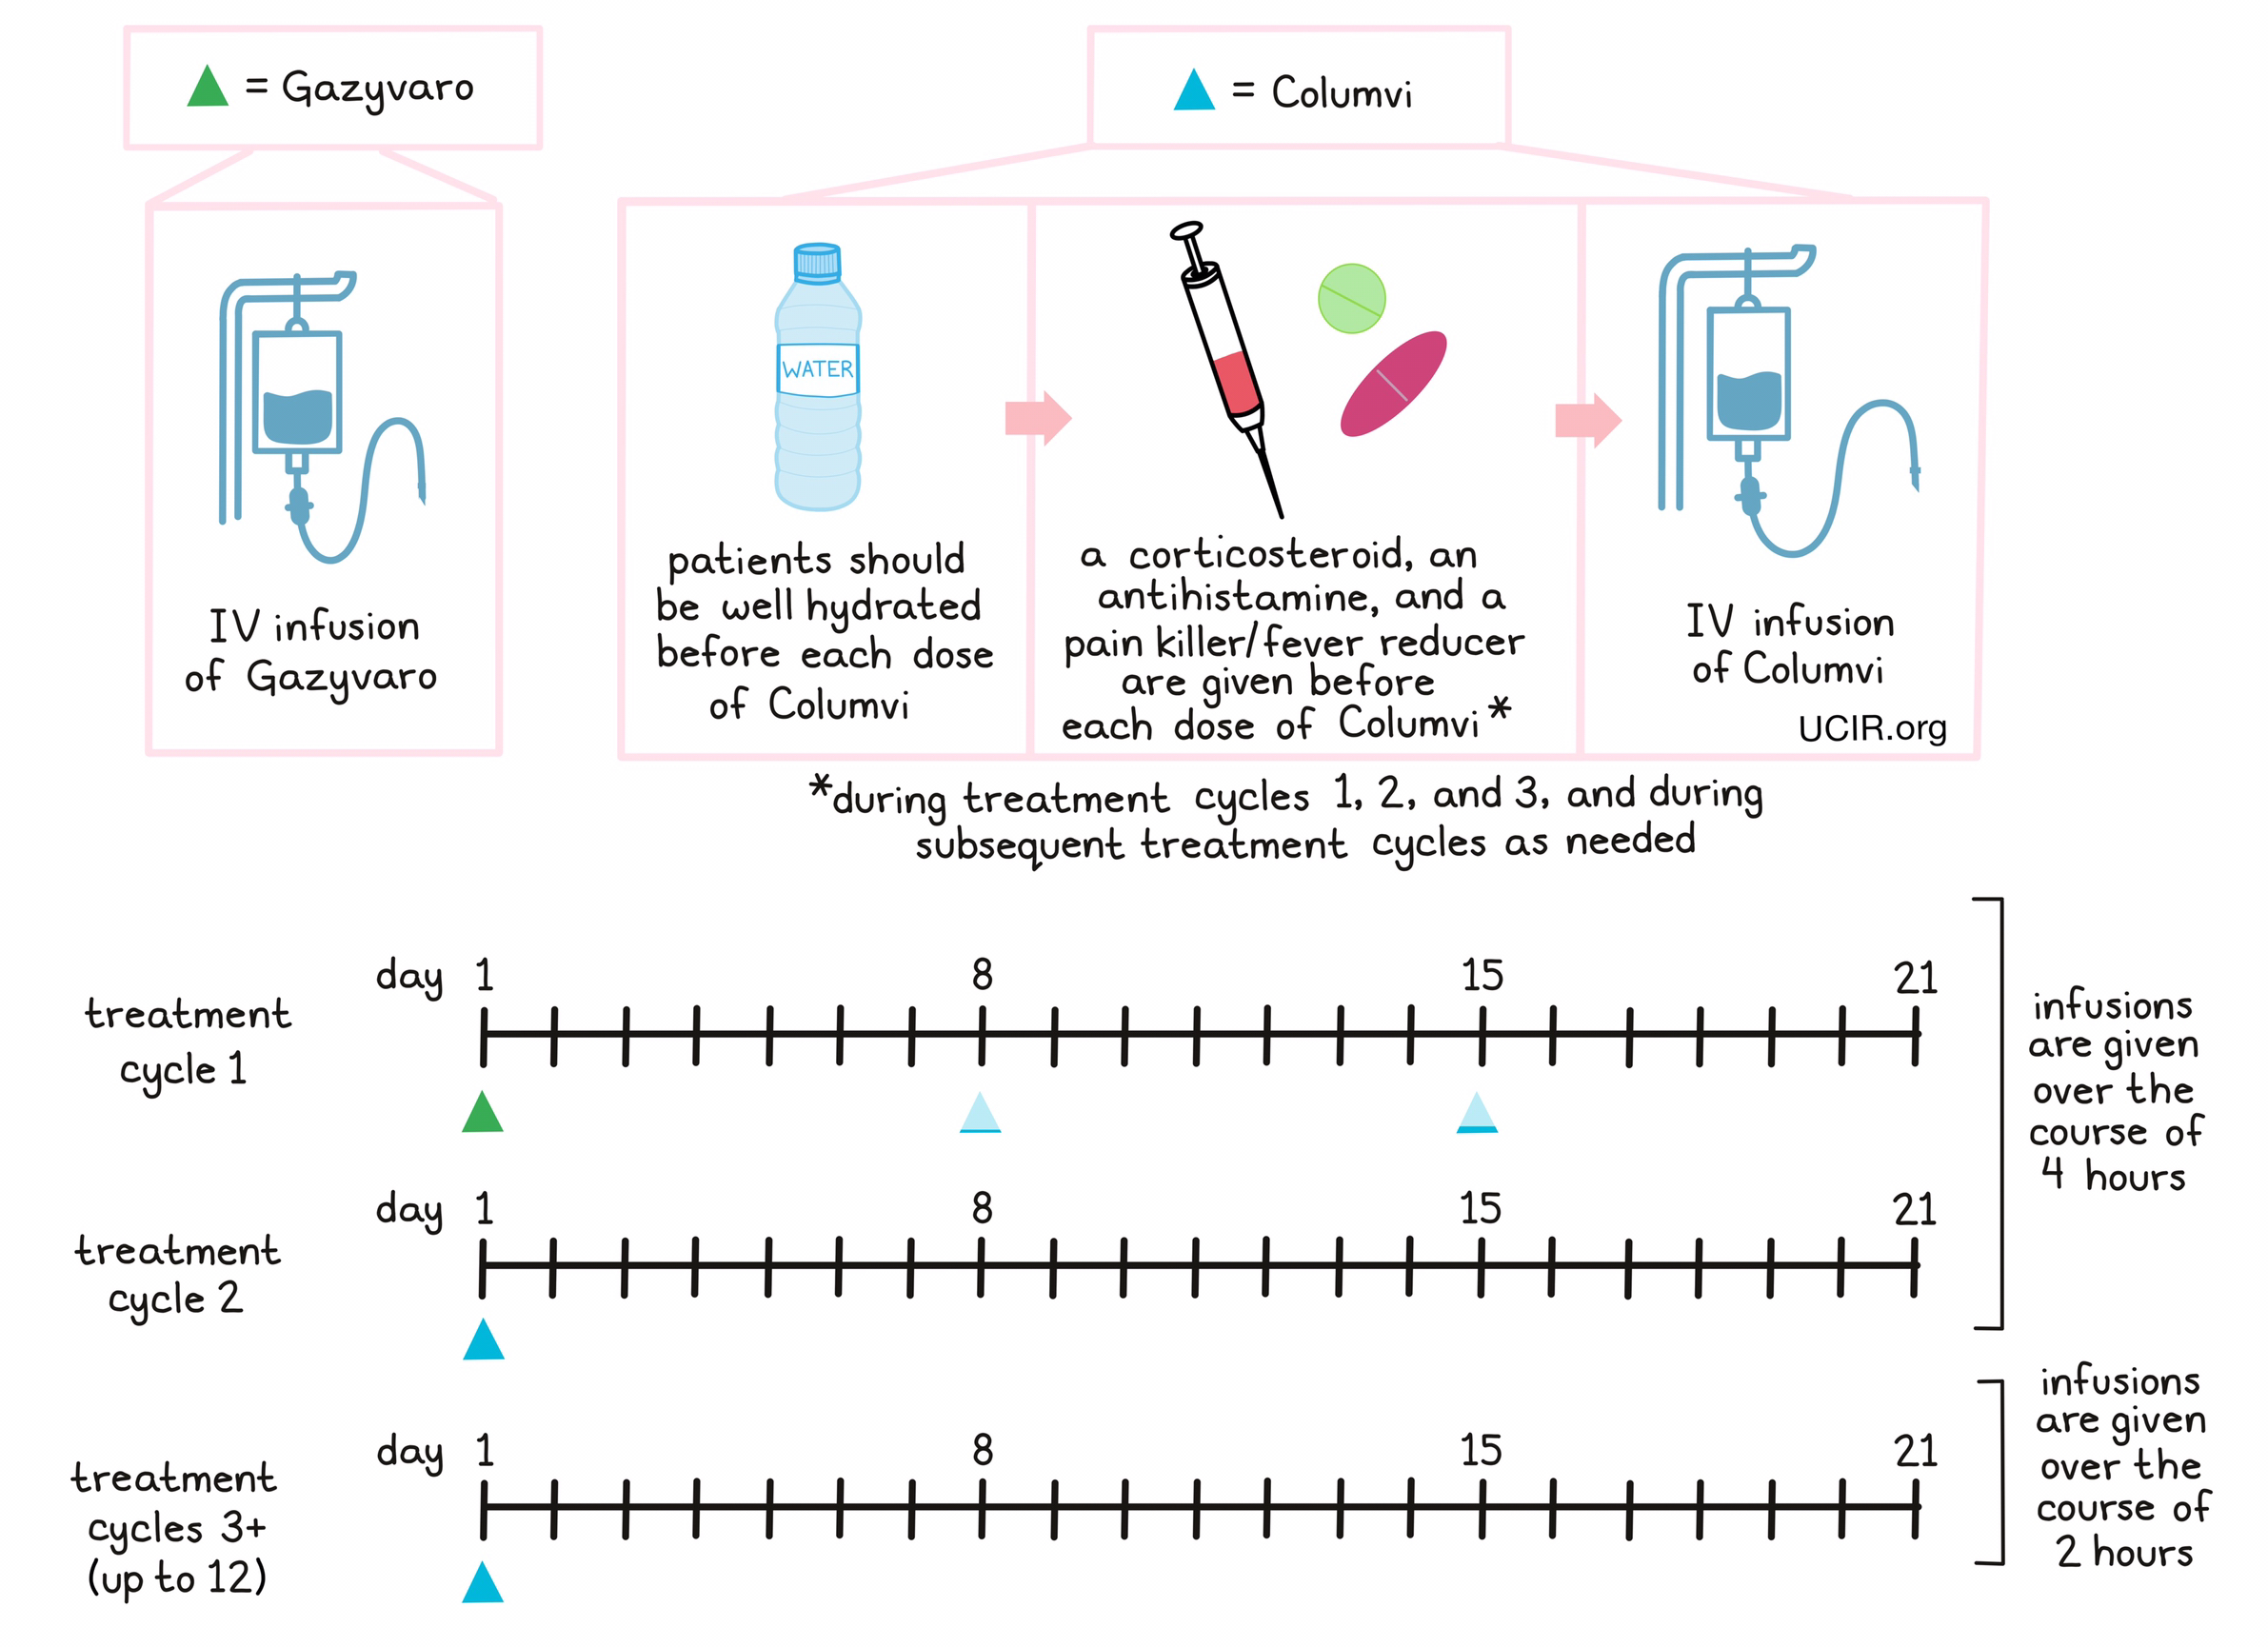 Illustration showing how Columvi is administered to patients 